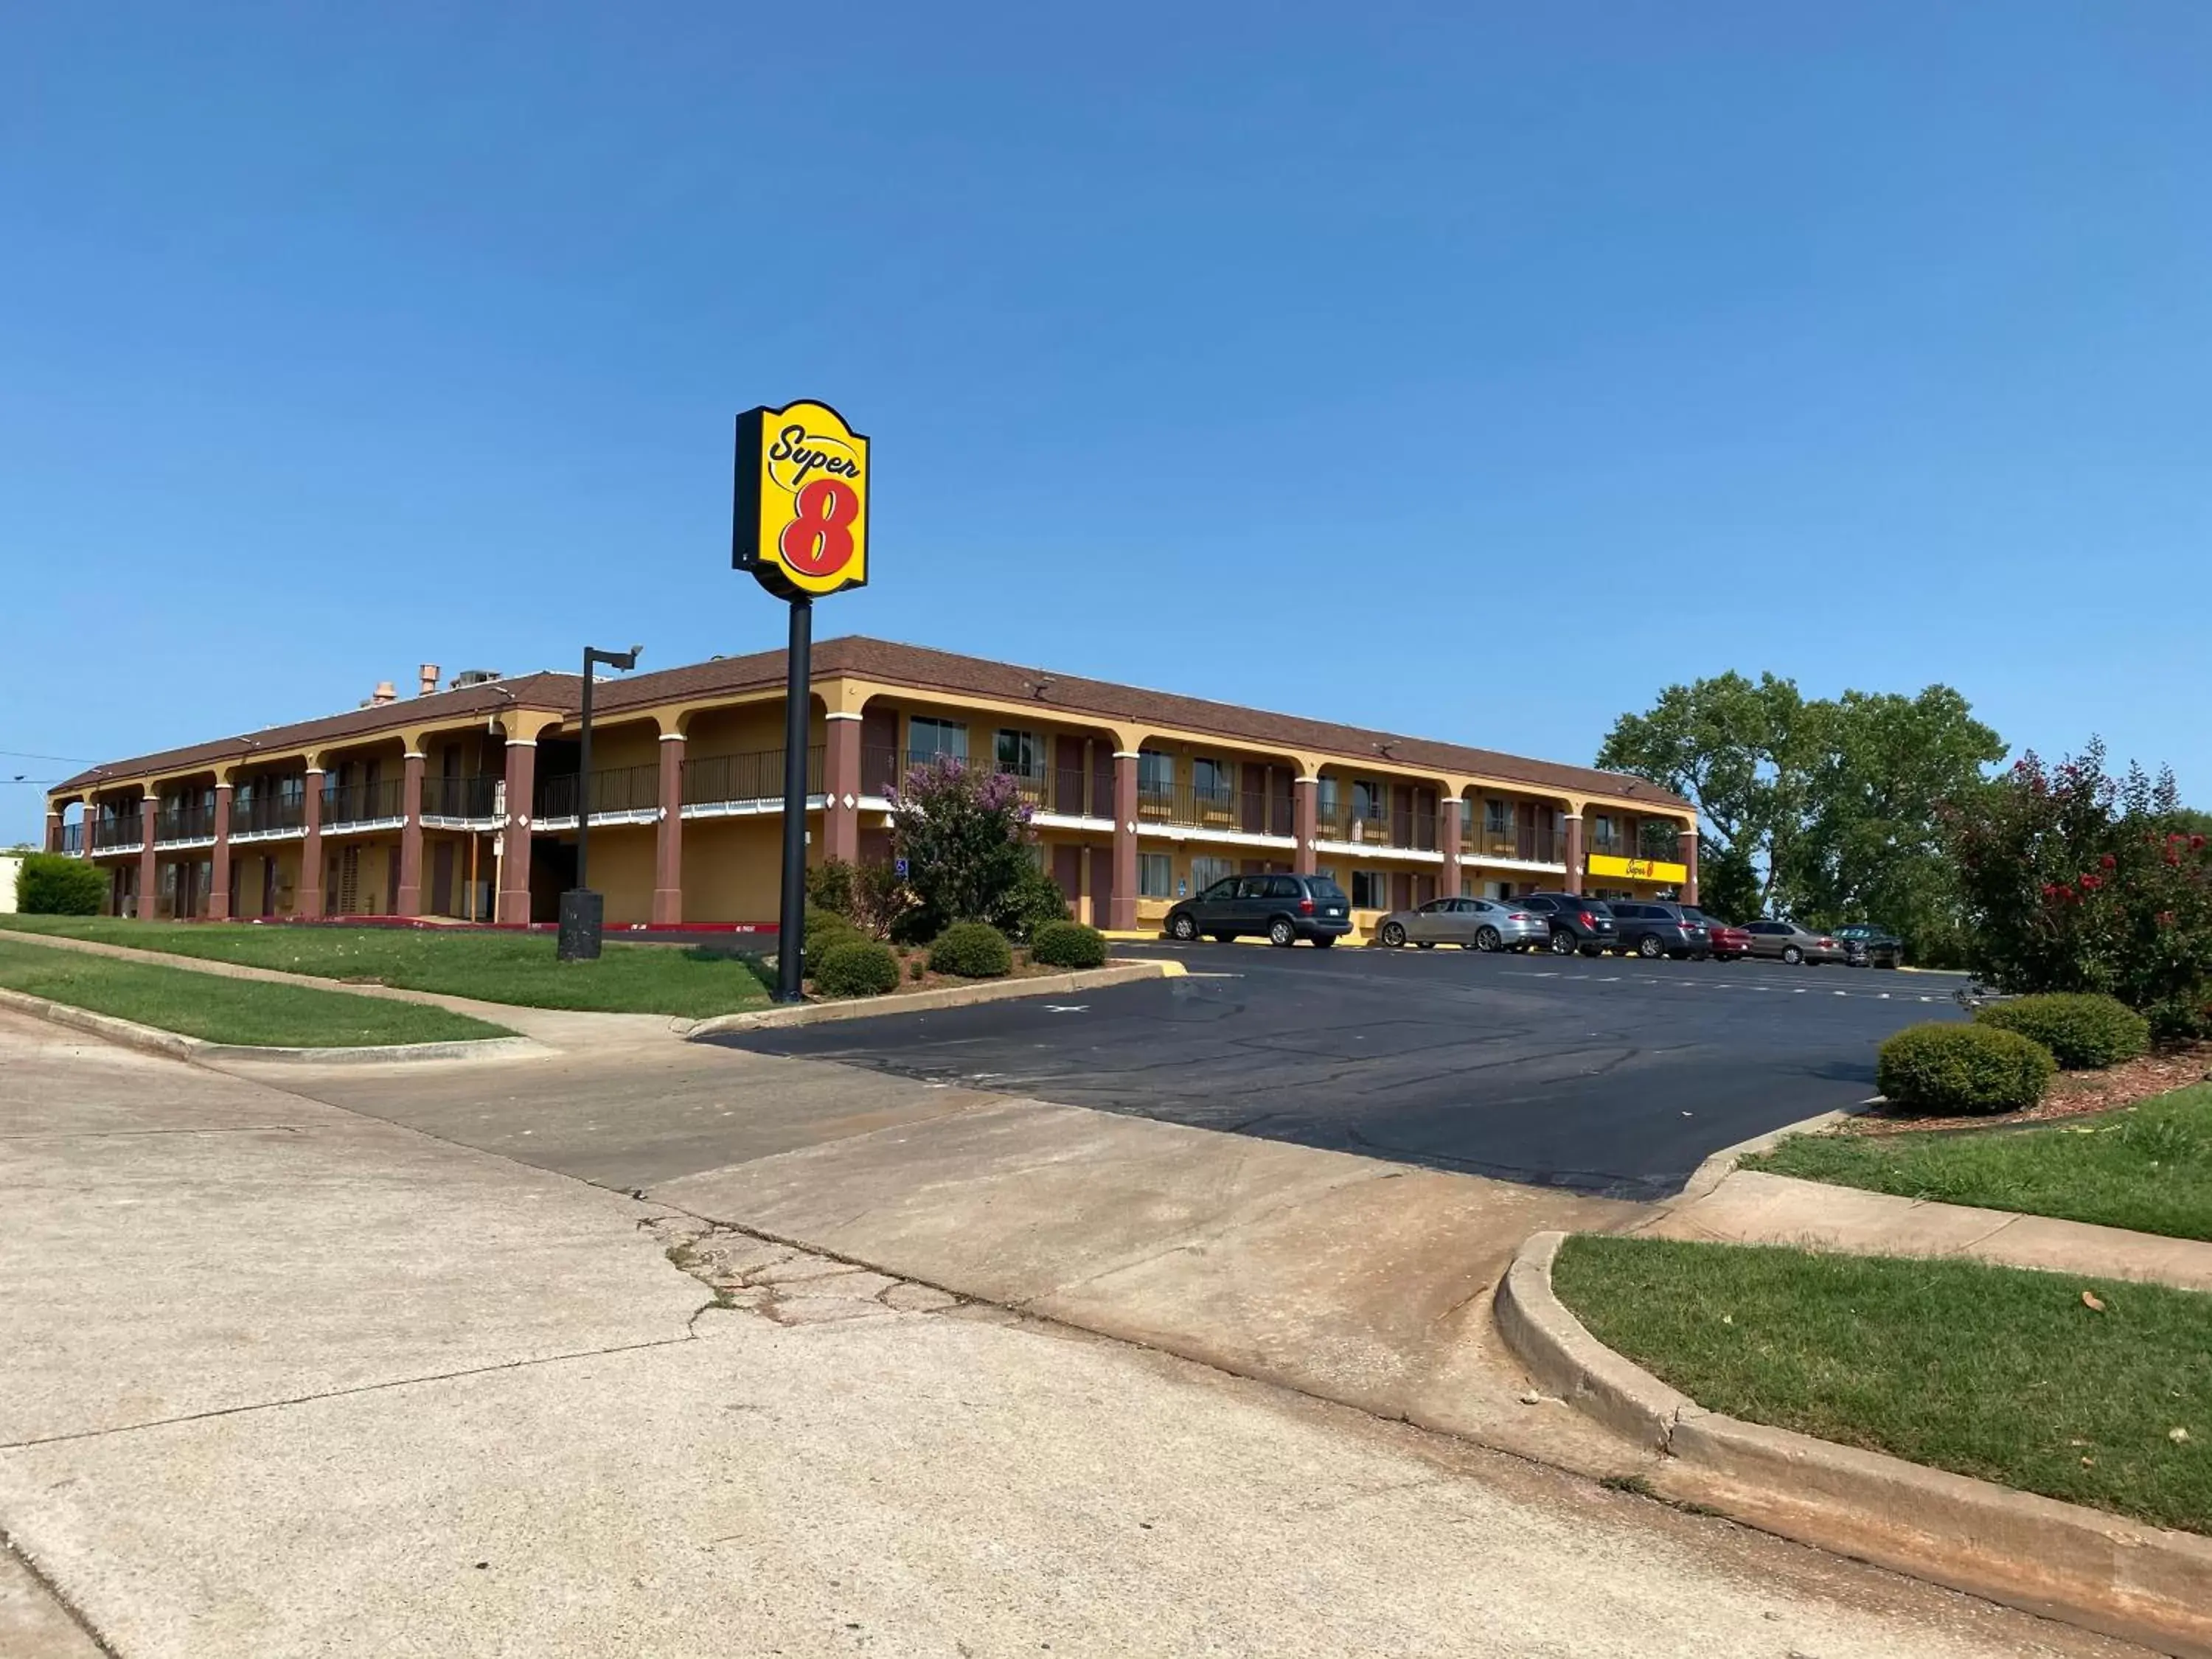 Property Building in Super 8 by Wyndham Midwest City OK